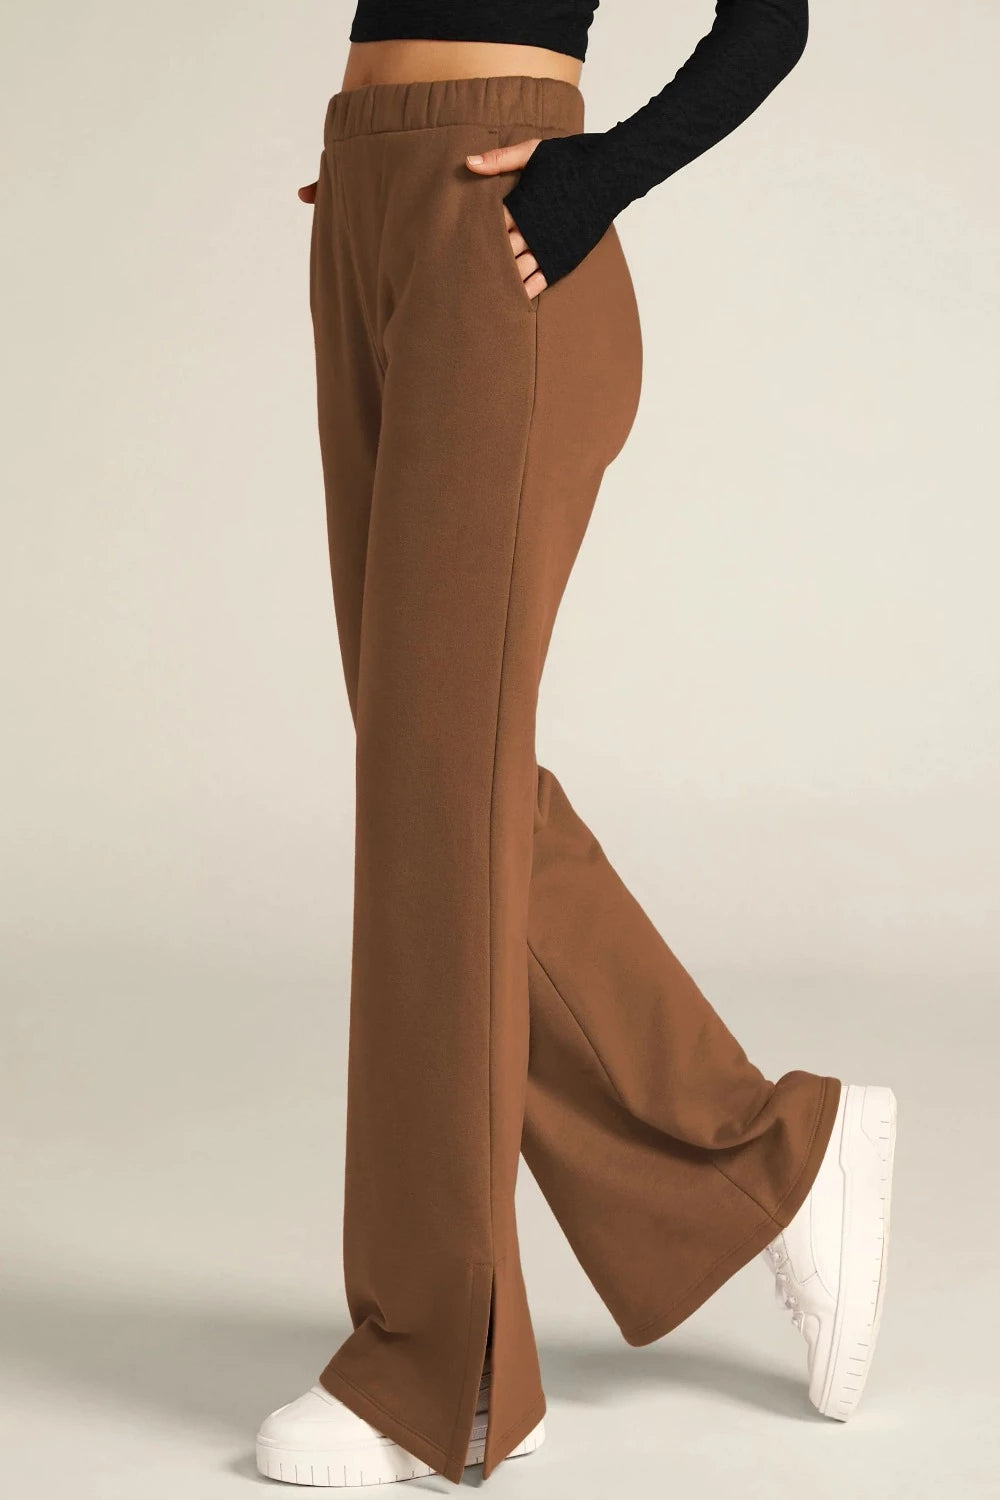 On the Go Pant in Toffee